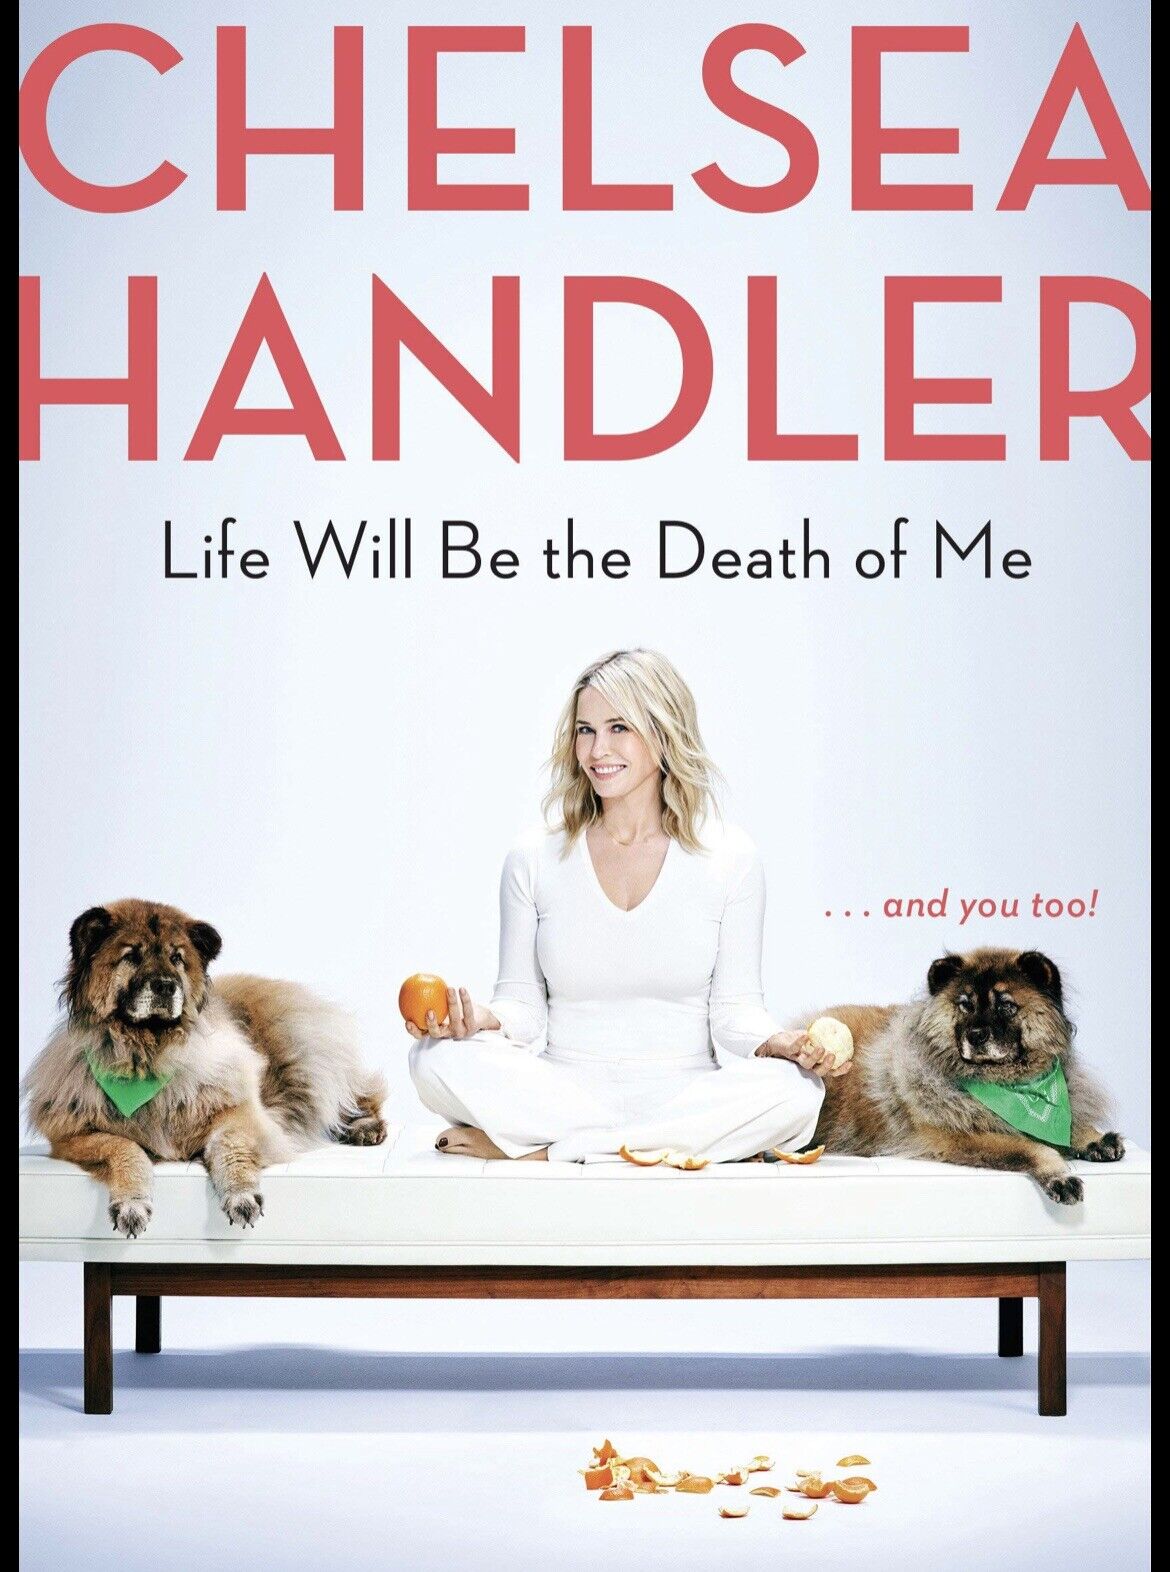 CHELSEA HANDLER SIGNED BOOK “LIFE WILL BE THE DEATH OF ME” E EMMY-WINNING SHOW